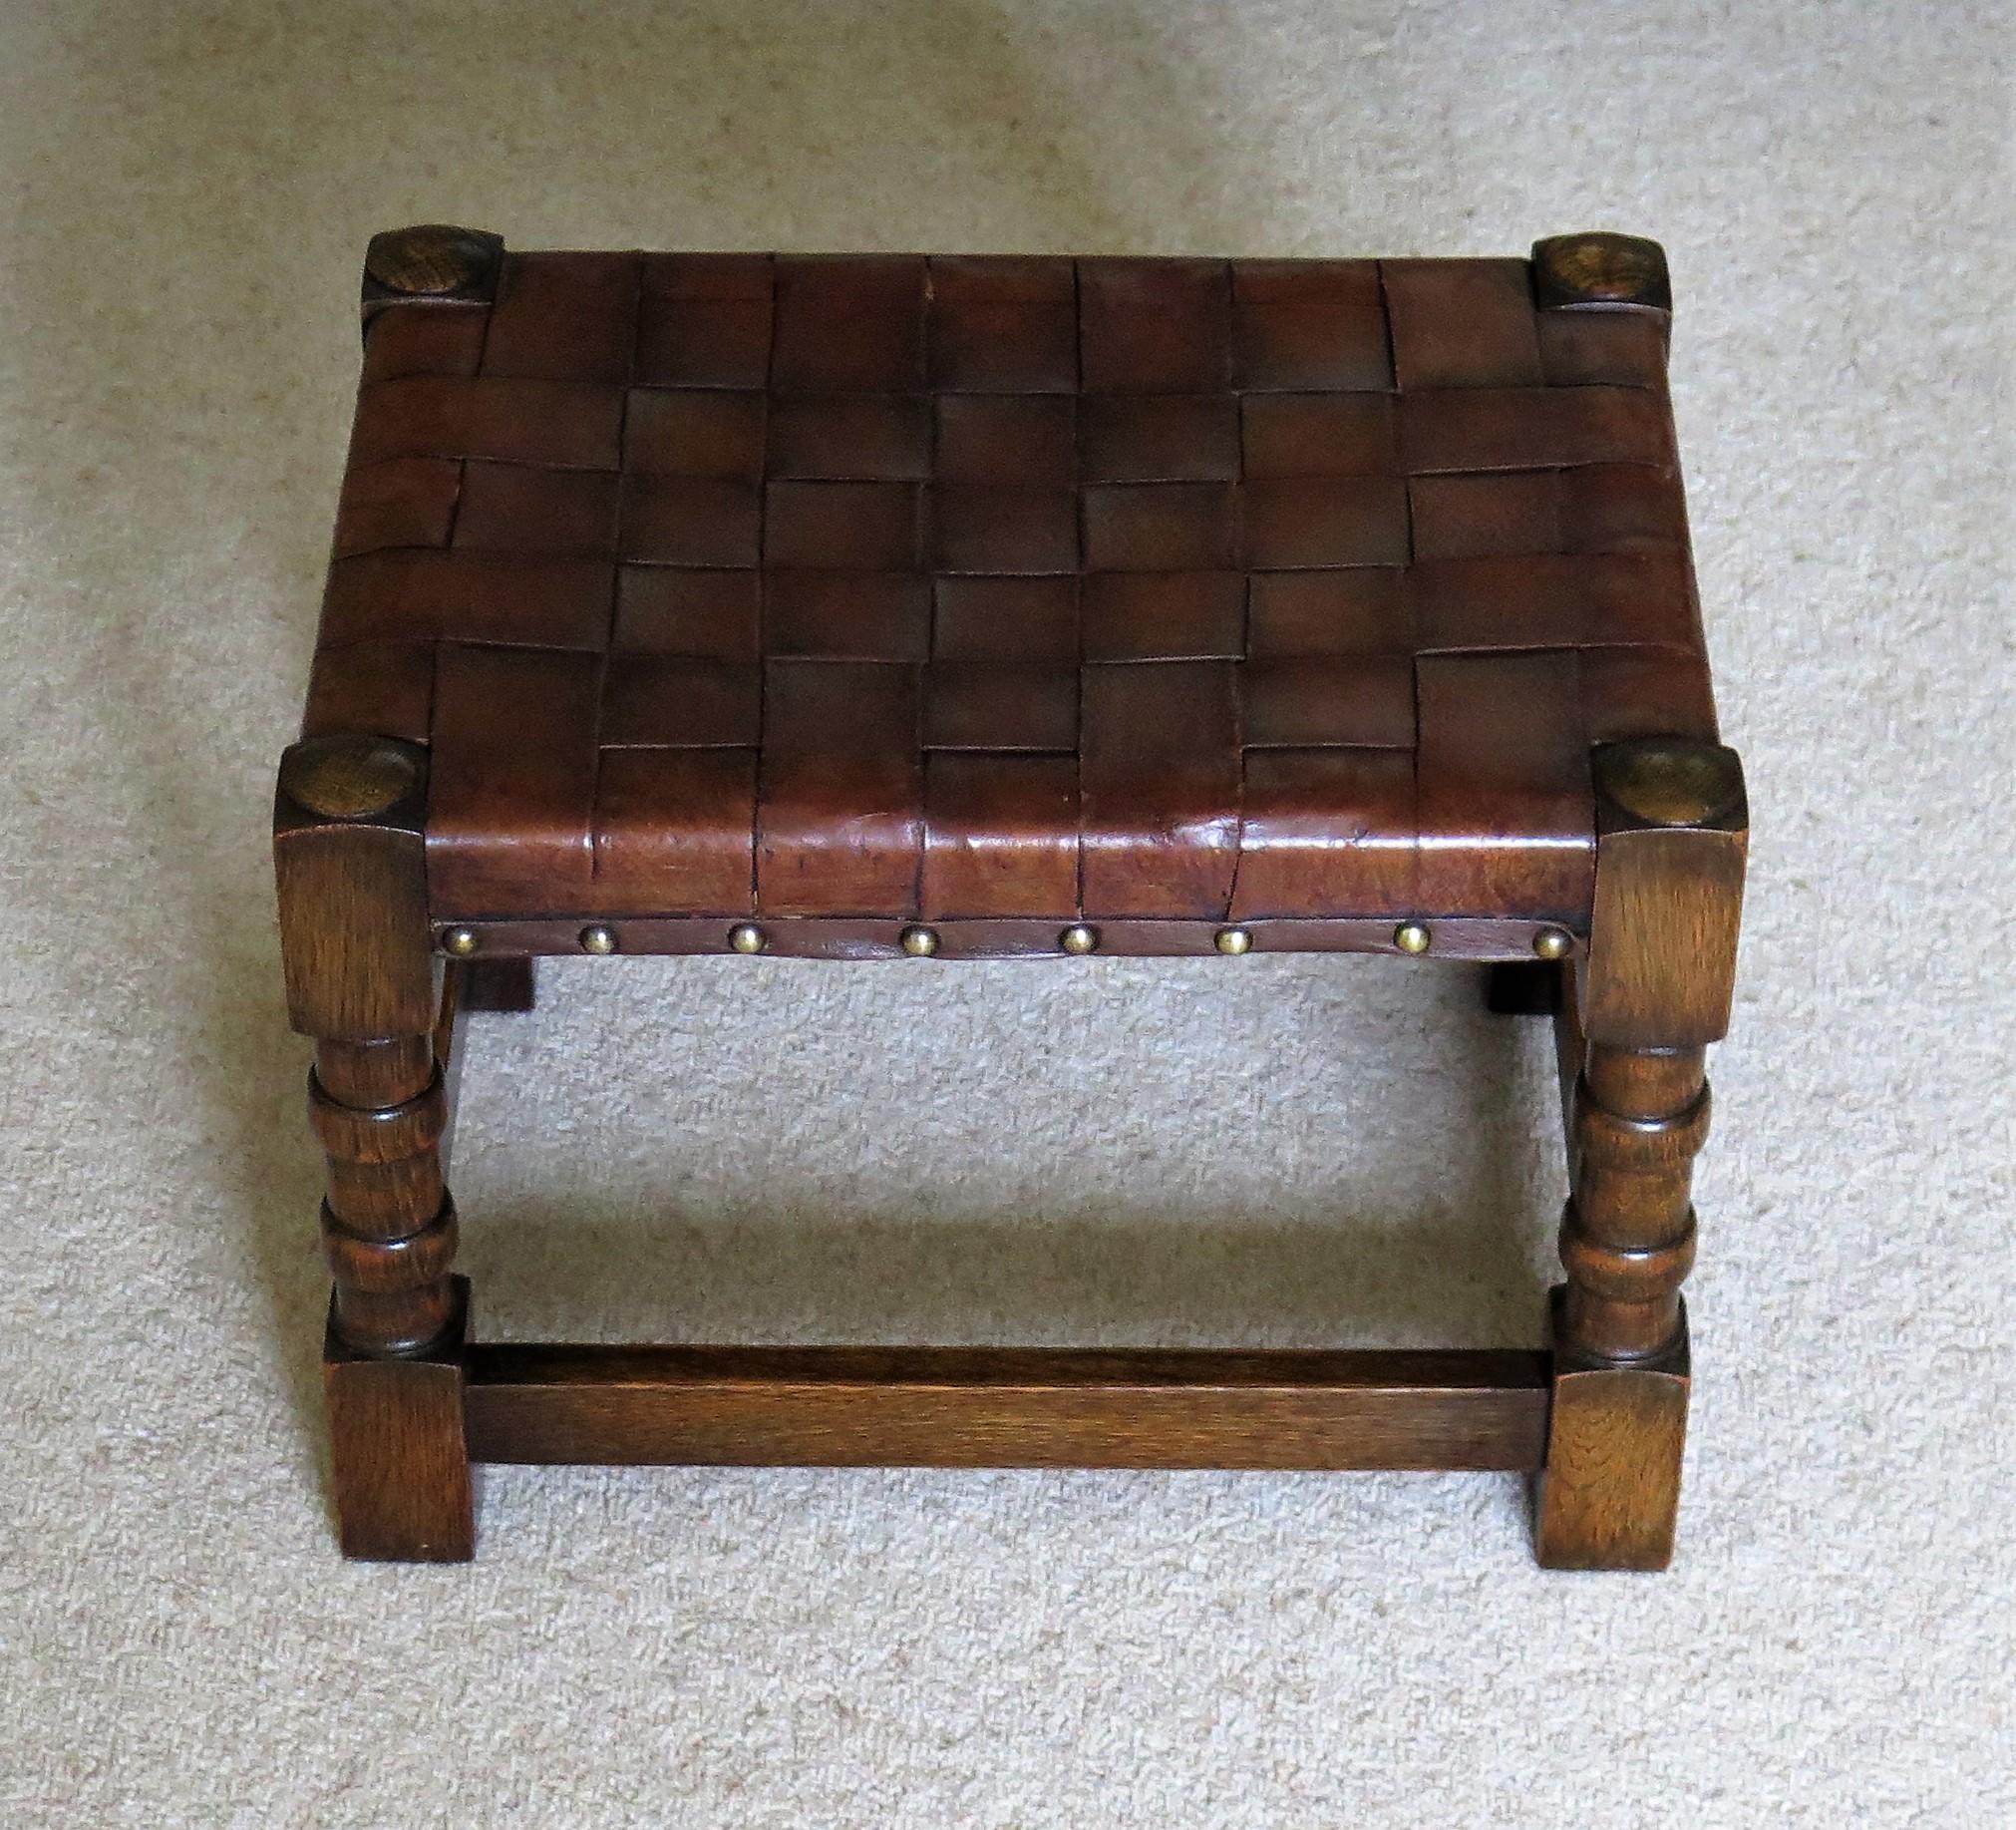 Handmade Oak Stool with Leather Strap Top, Arts & Crafts Late 19th Century For Sale 2